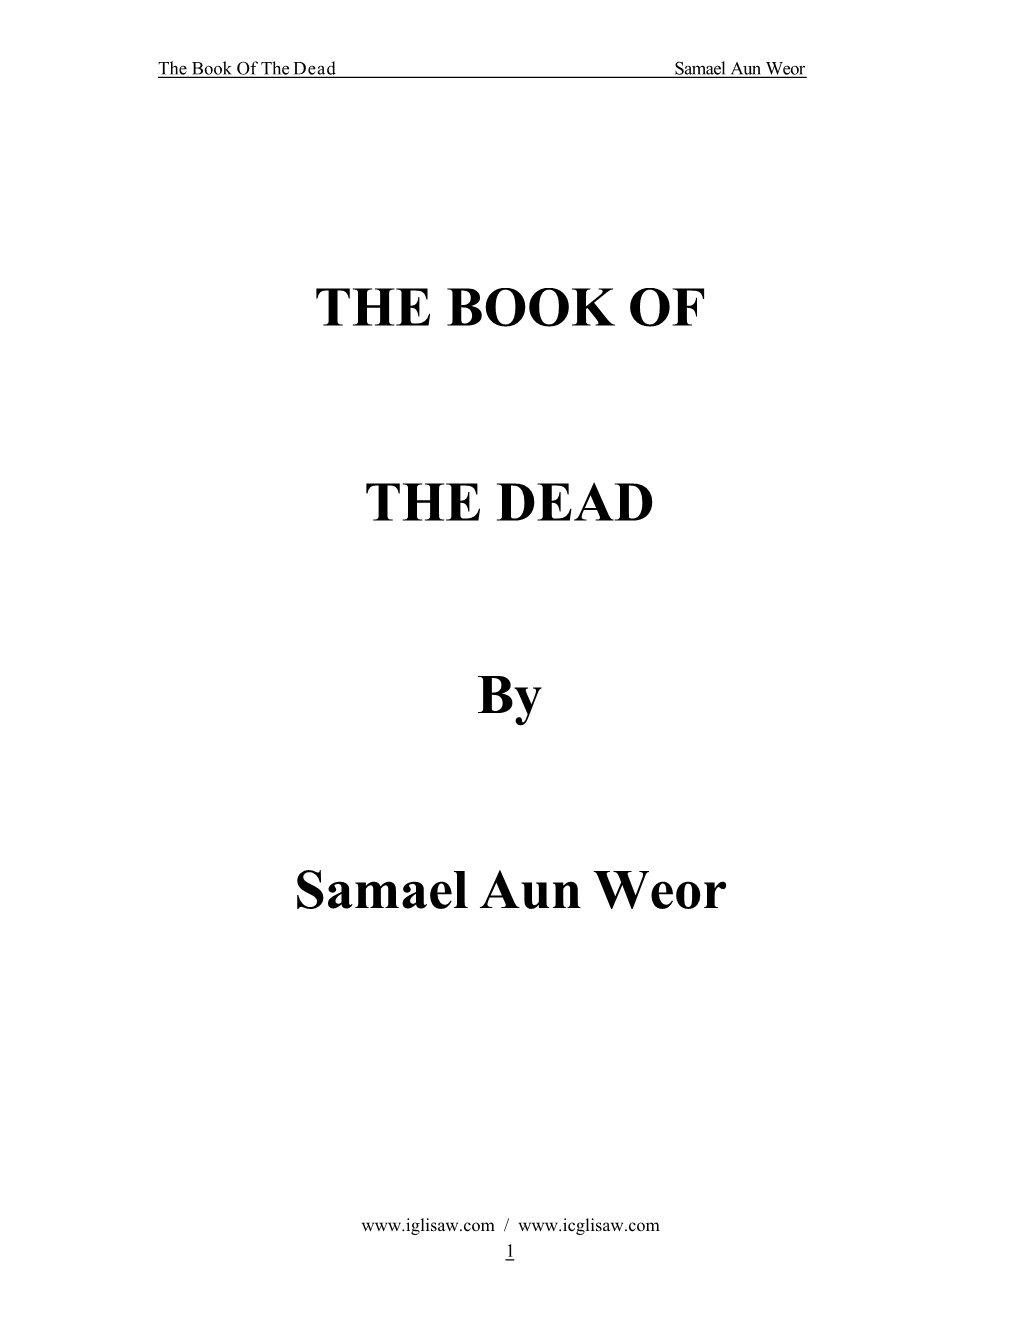 THE BOOK of the DEAD by Samael Aun Weor